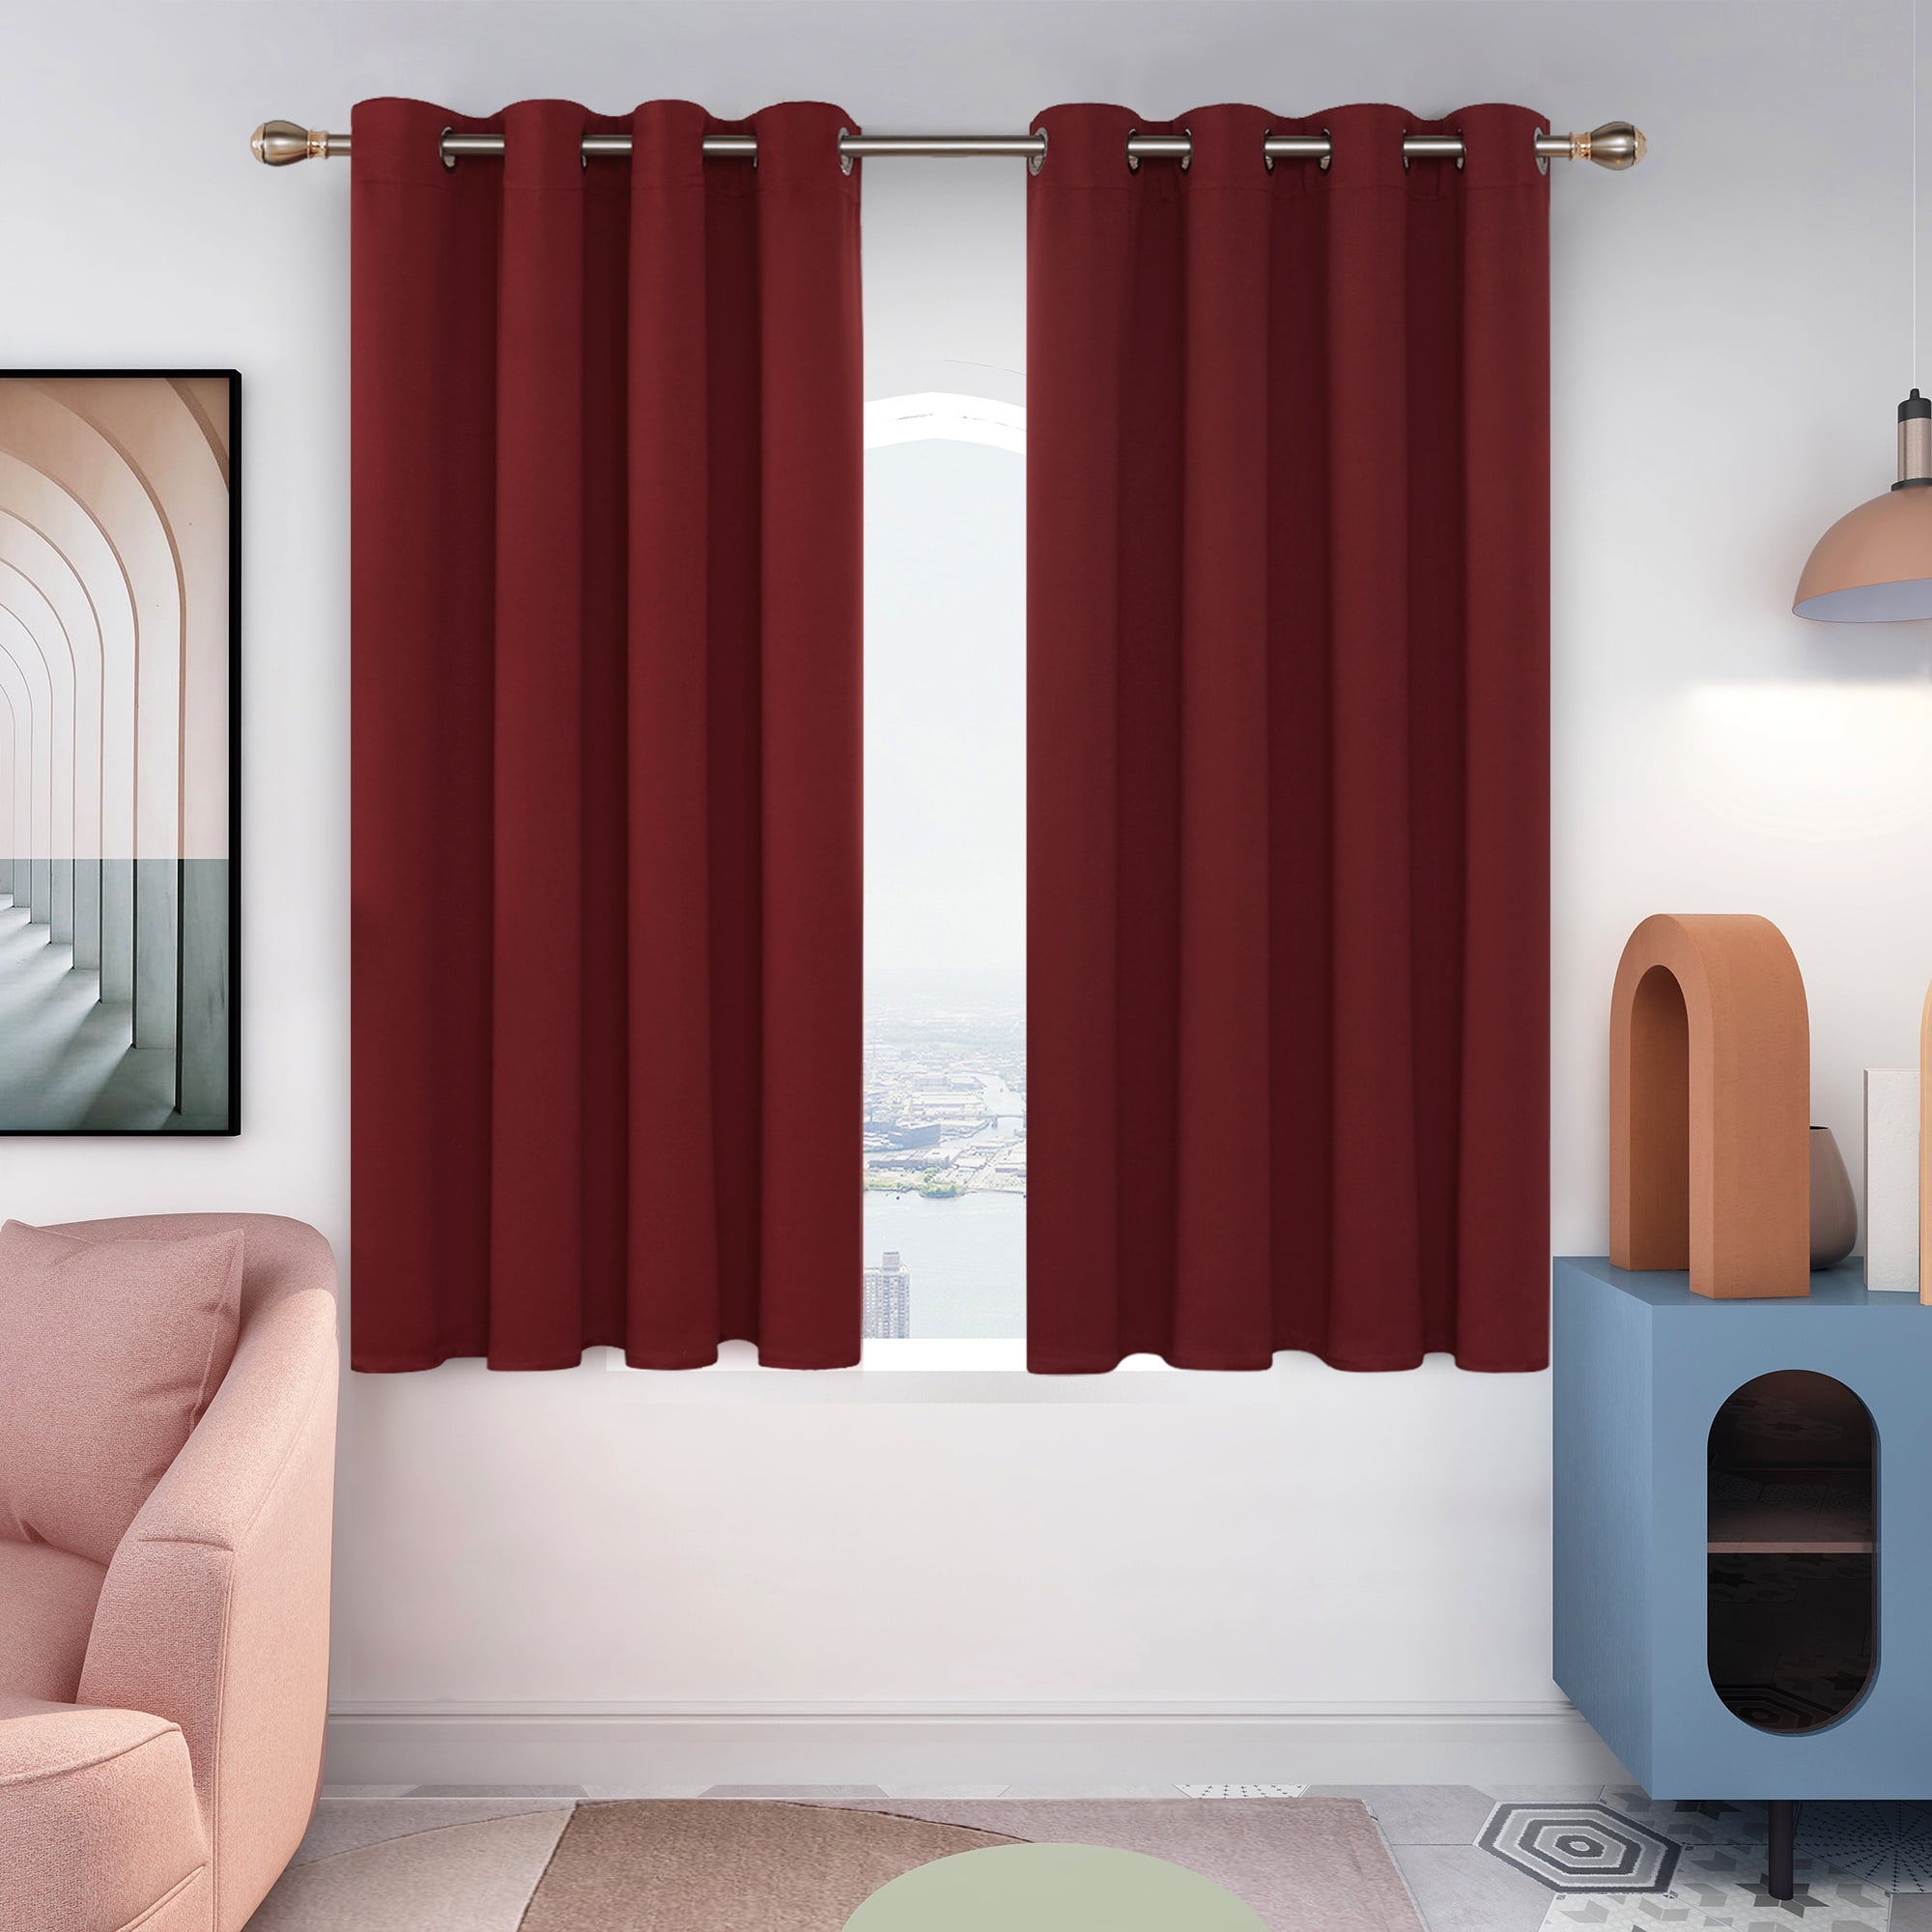 Scarlet Jacquard Grommet Window Panel And Valance Treatments Coral 